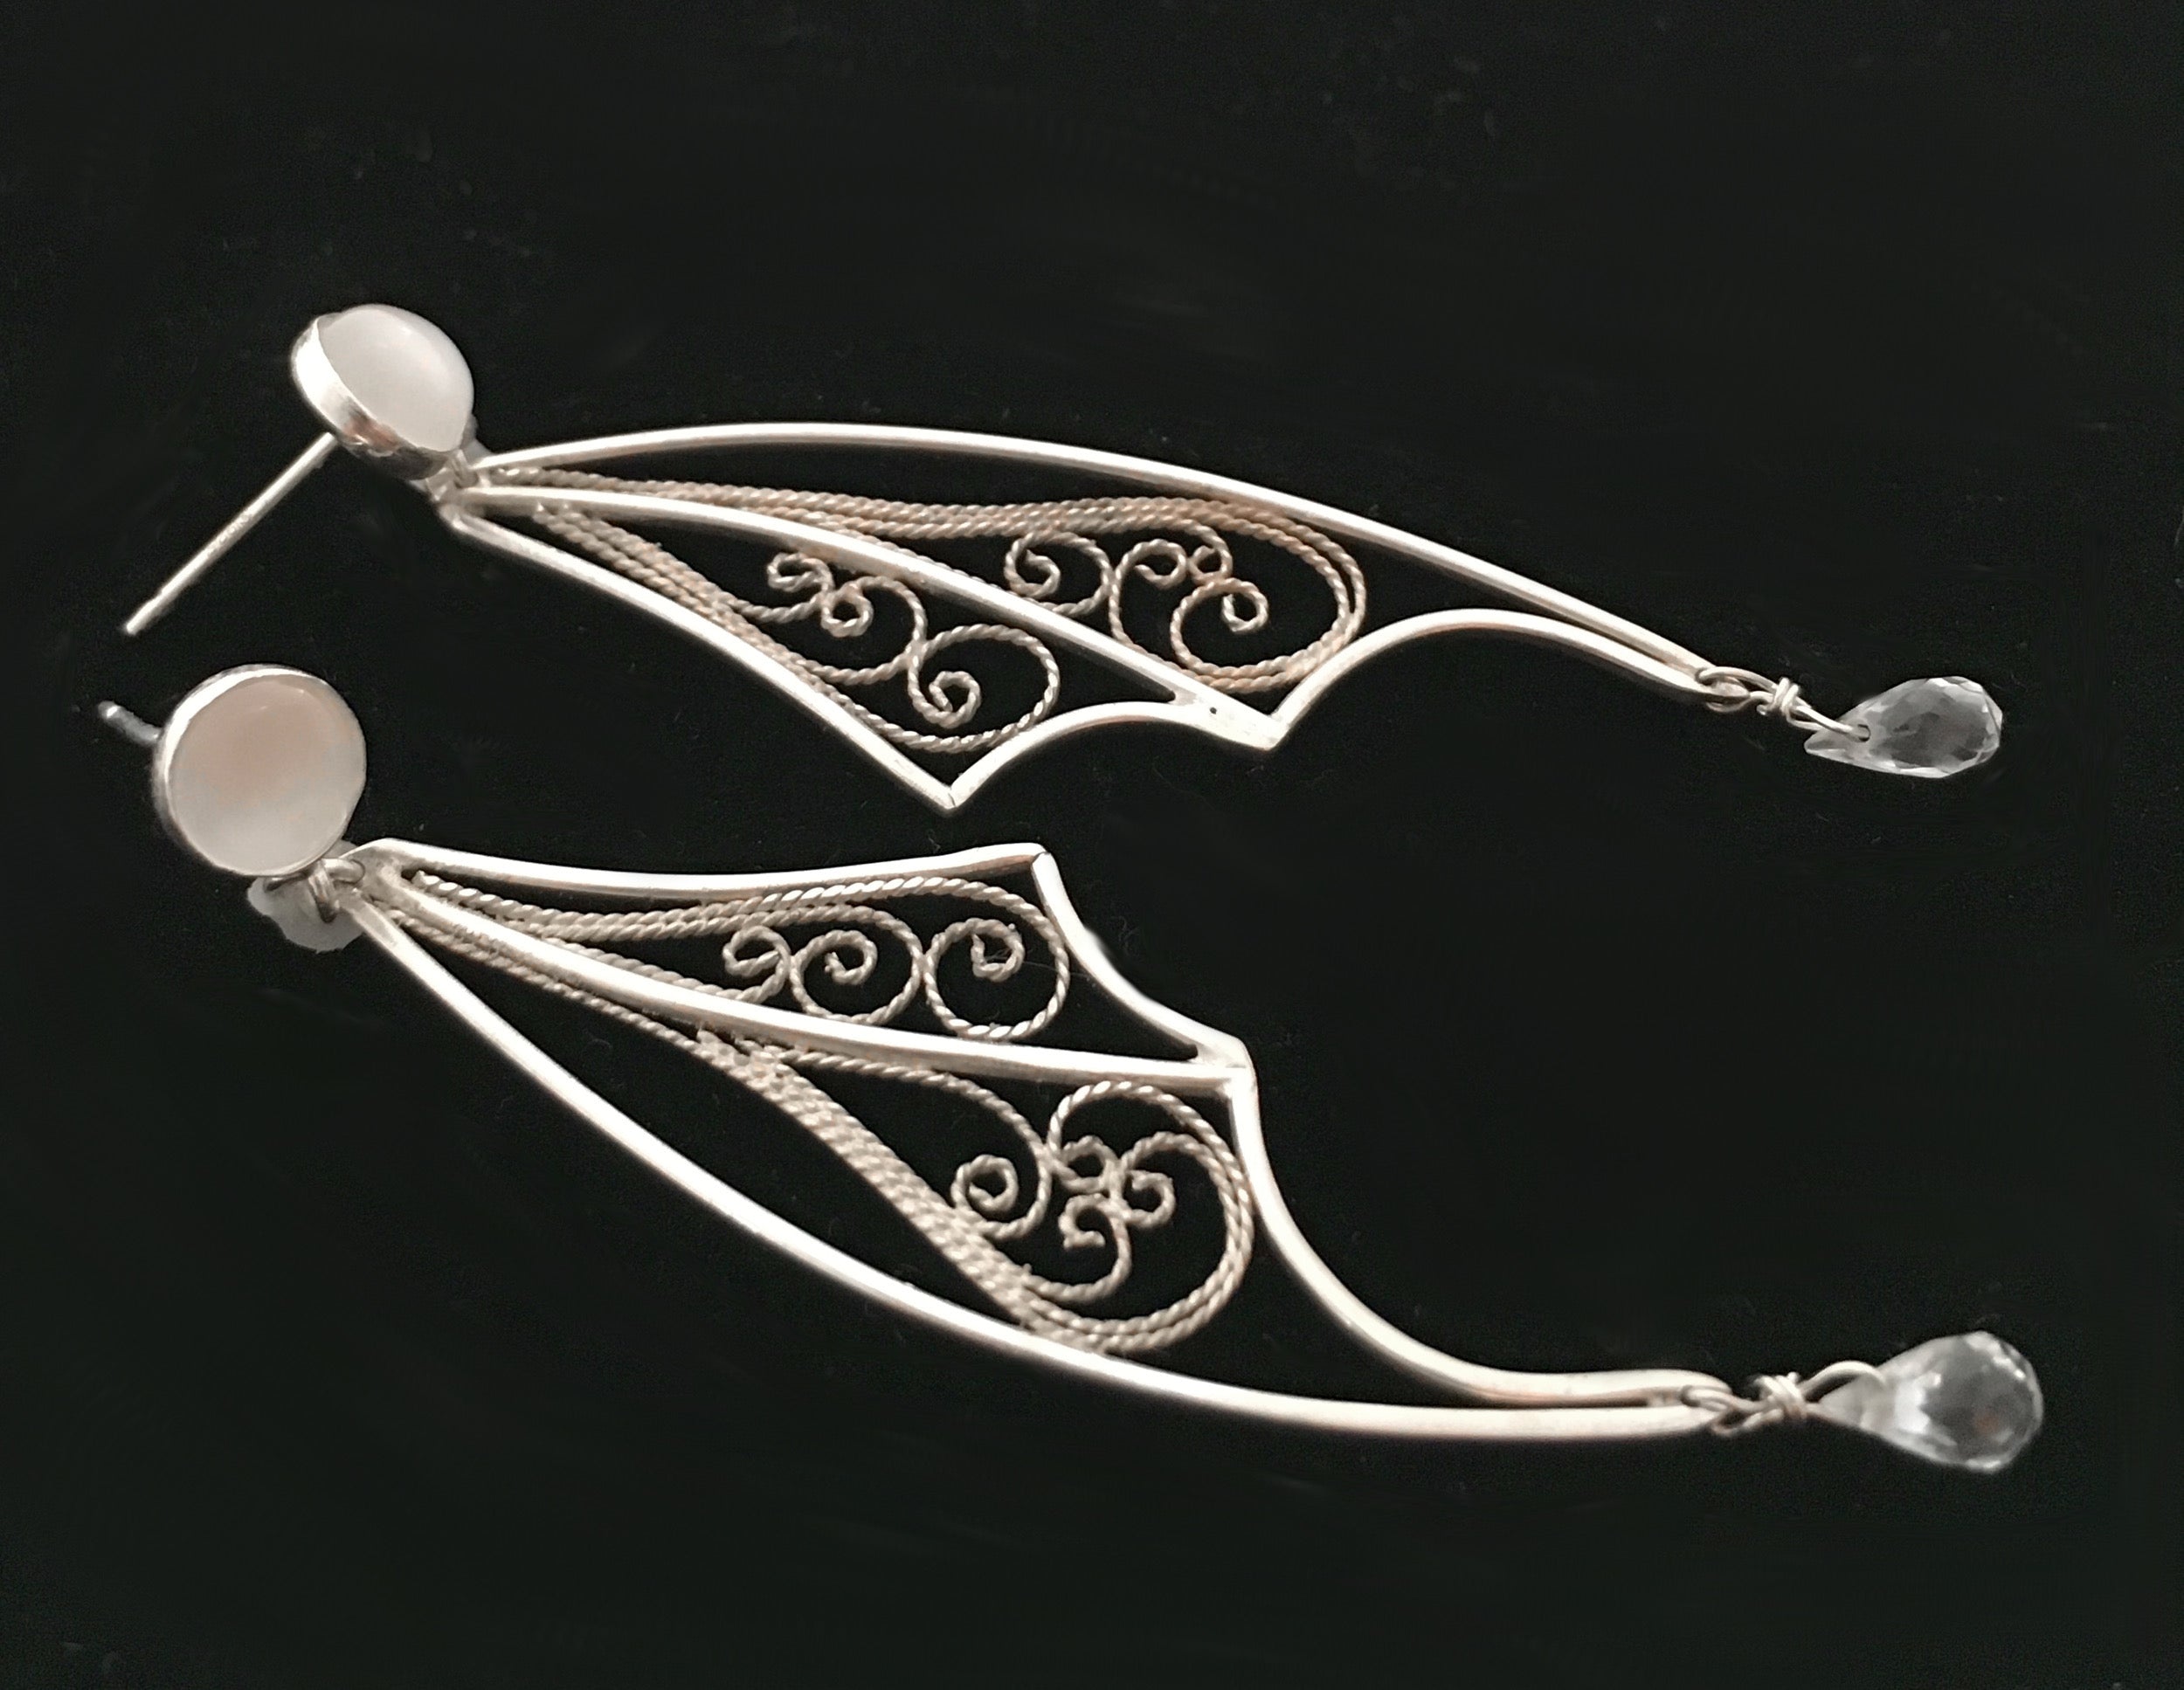 handmade silver filigree statement earrings with moonstone and white topaz